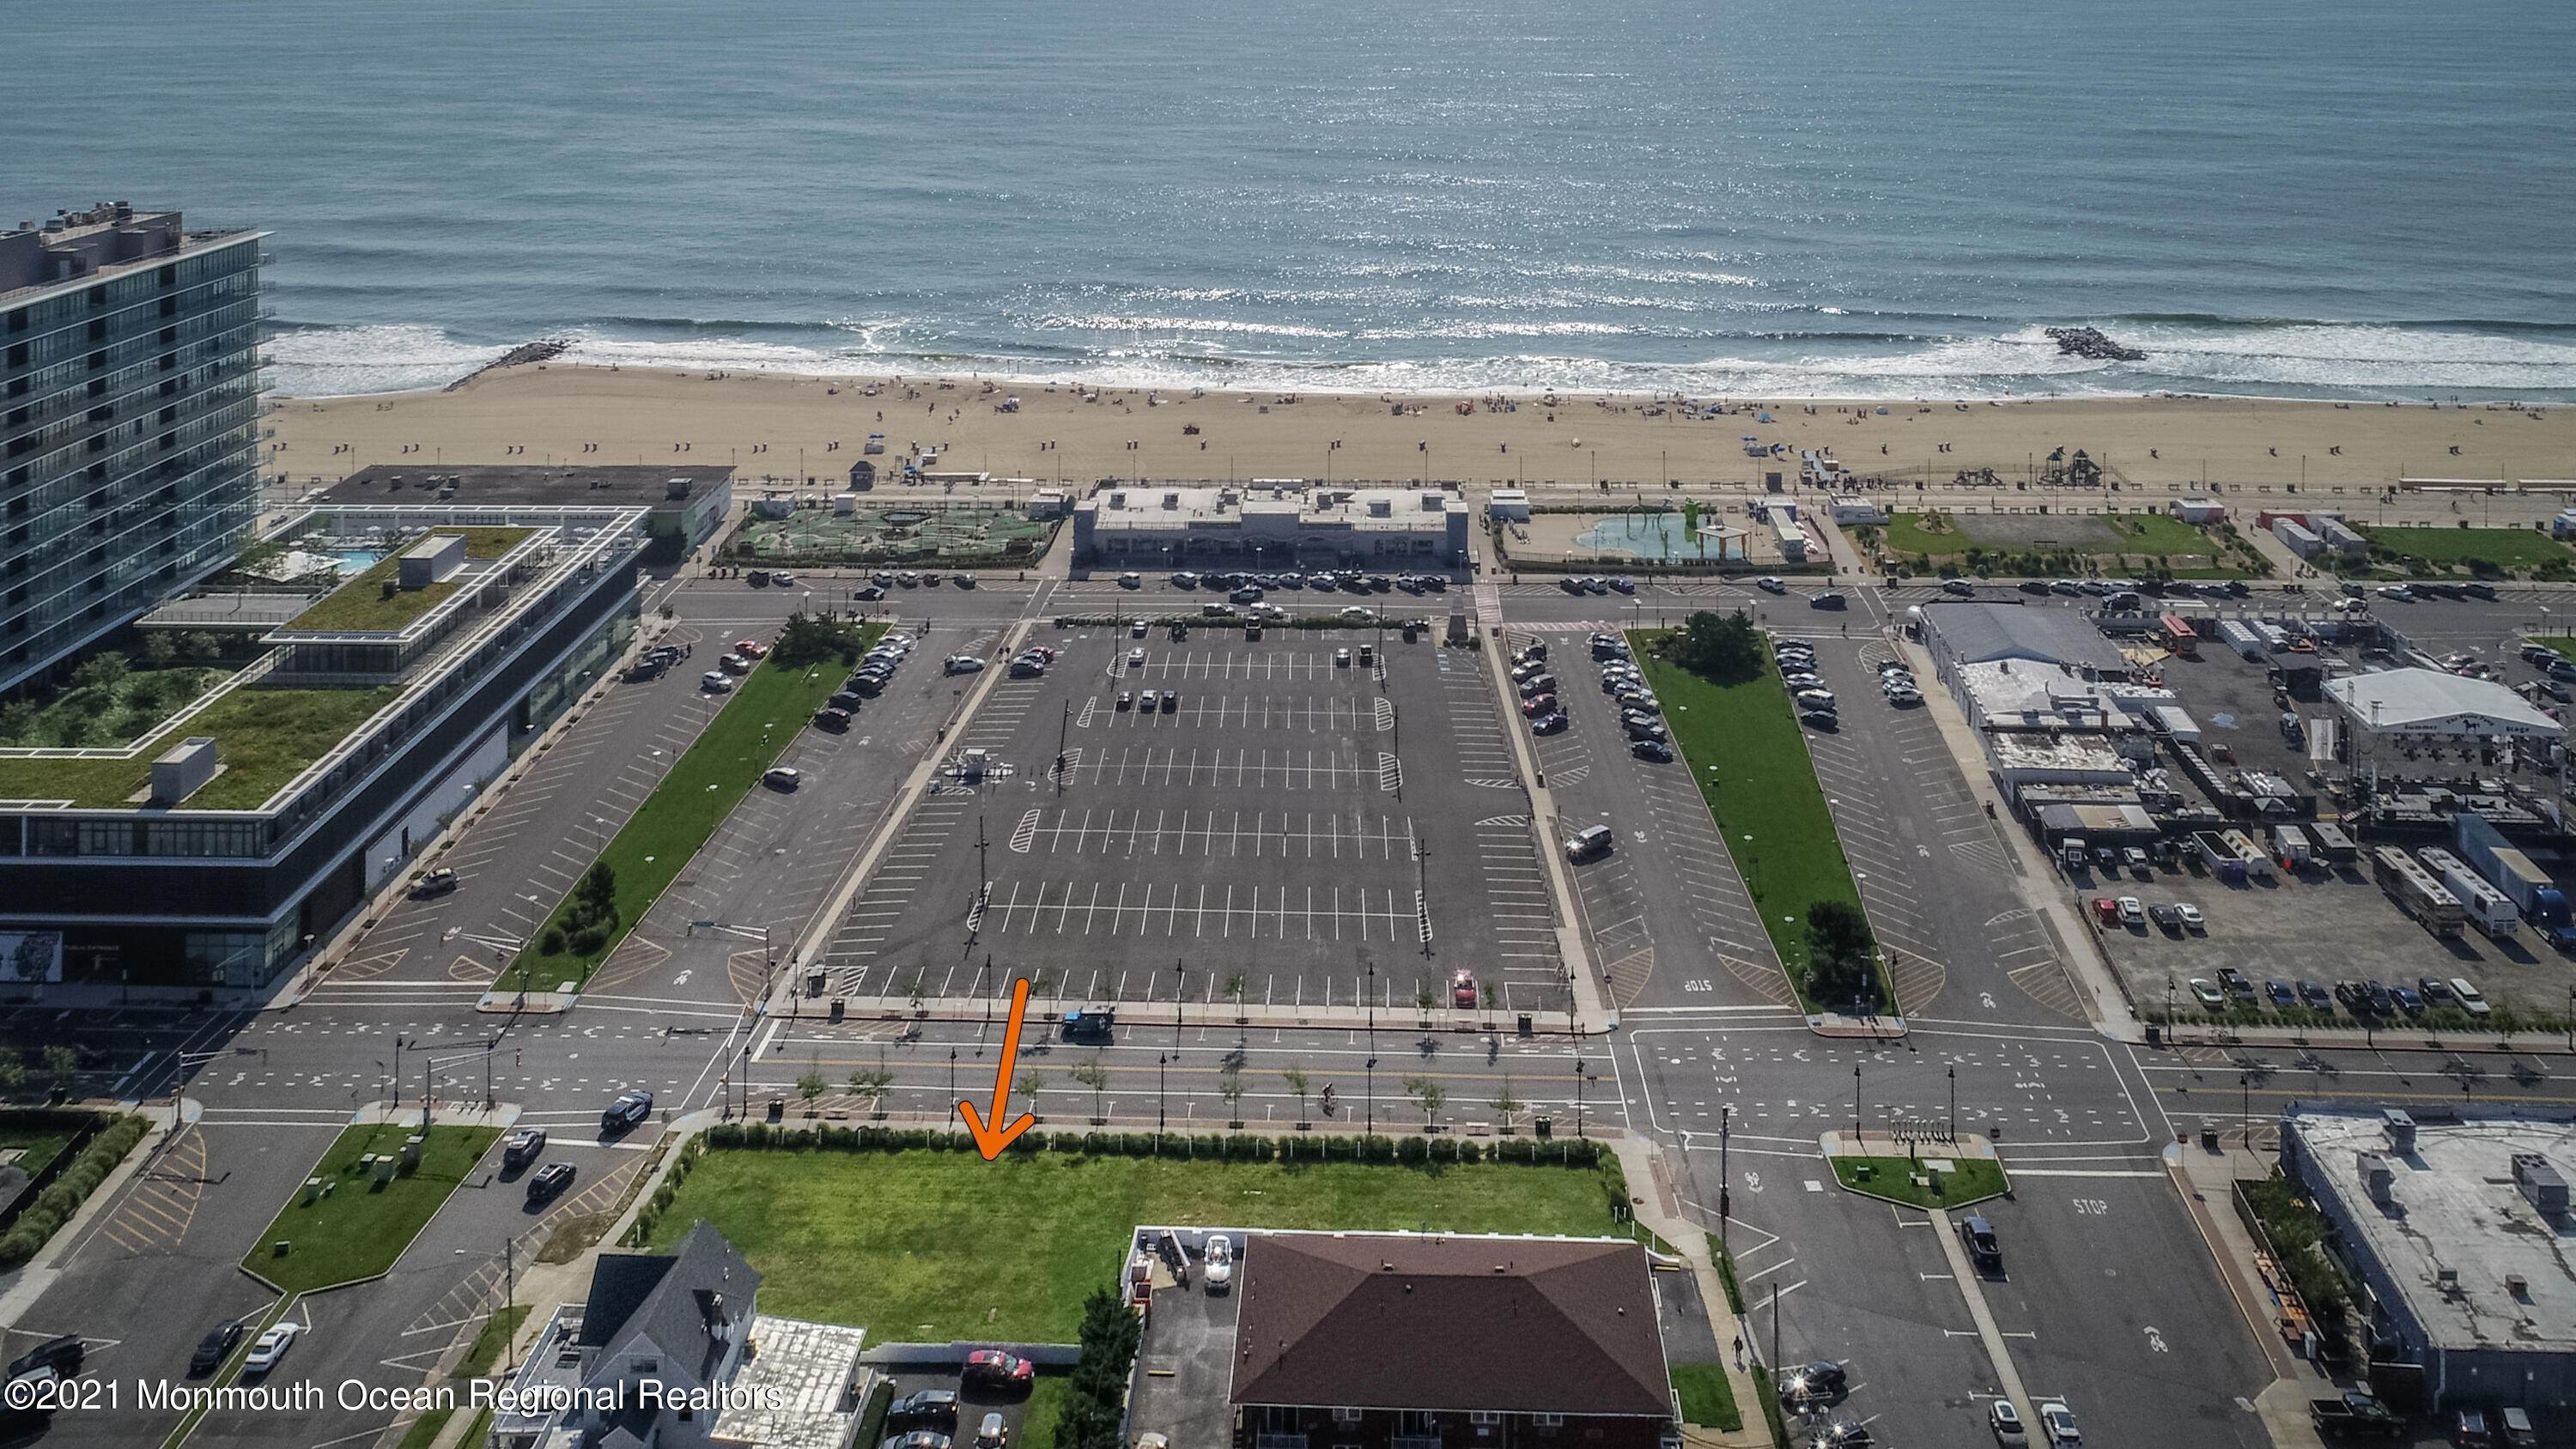 Property for Sale at 200 3rd Avenue Asbury Park, New Jersey 07712 United States